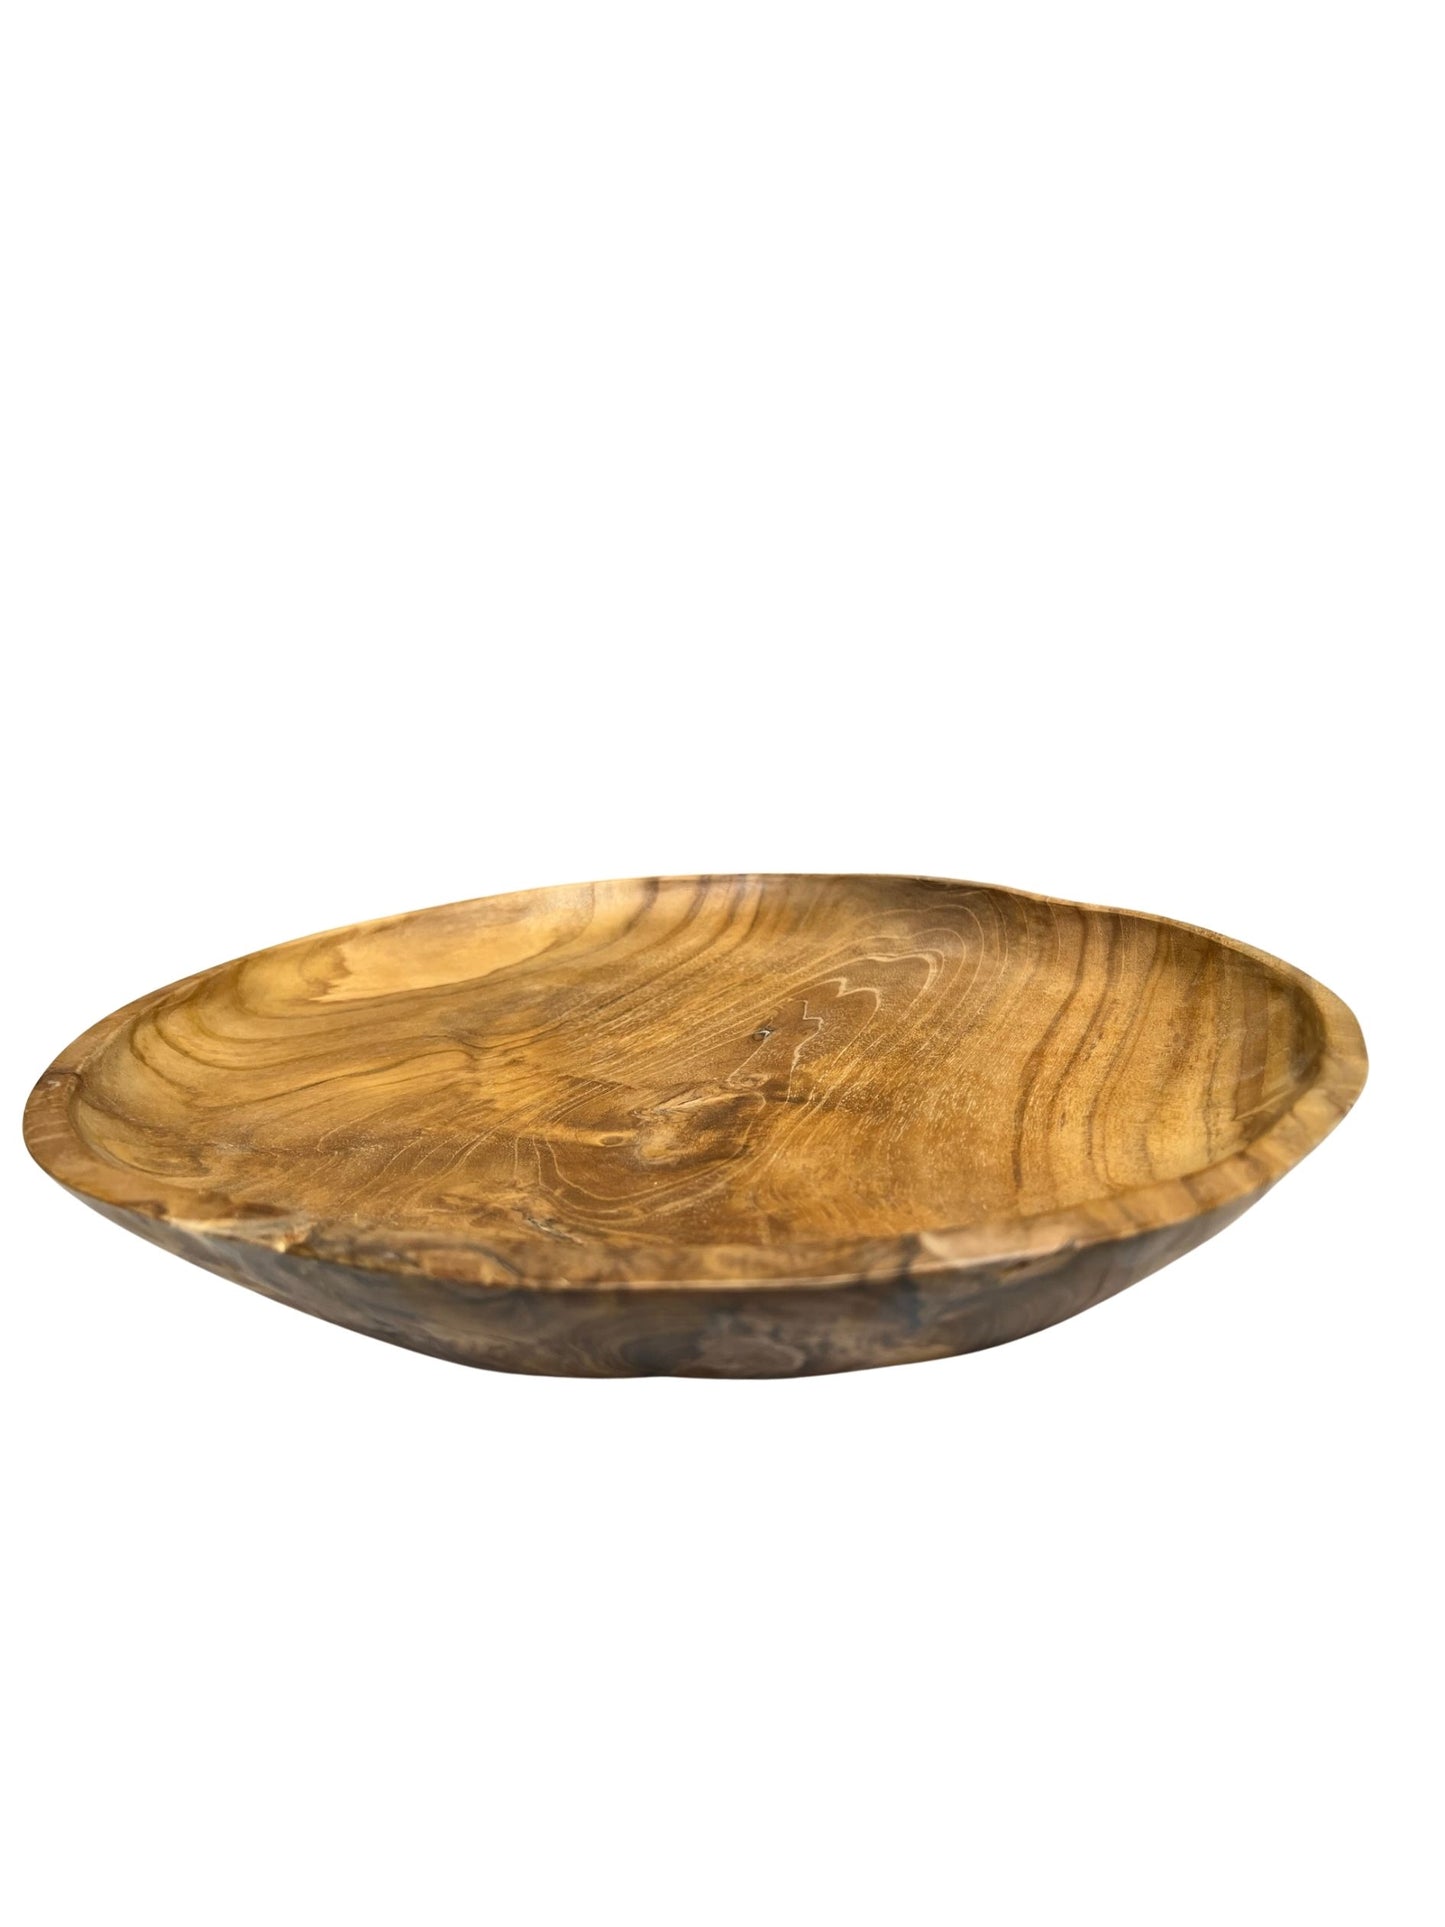 Eclectic Home Accent Teak Plate 2908 Natural  Decor Furniture